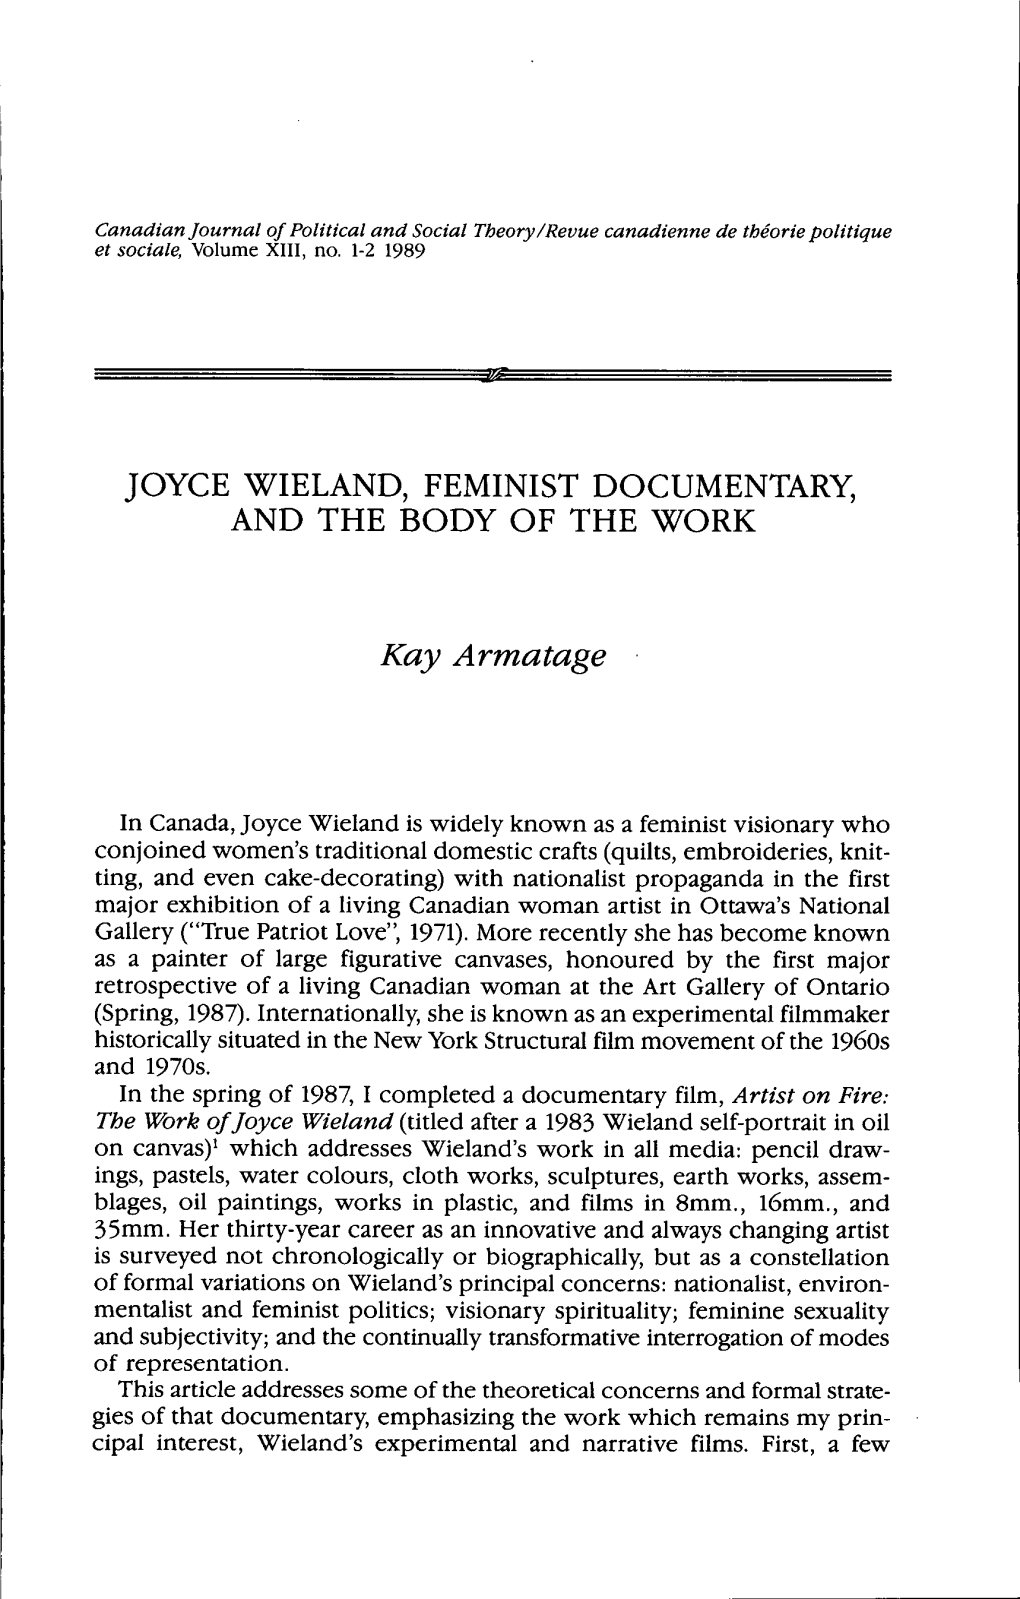 Joyce Wieland, Feminist Documentary, and the Body of the Work